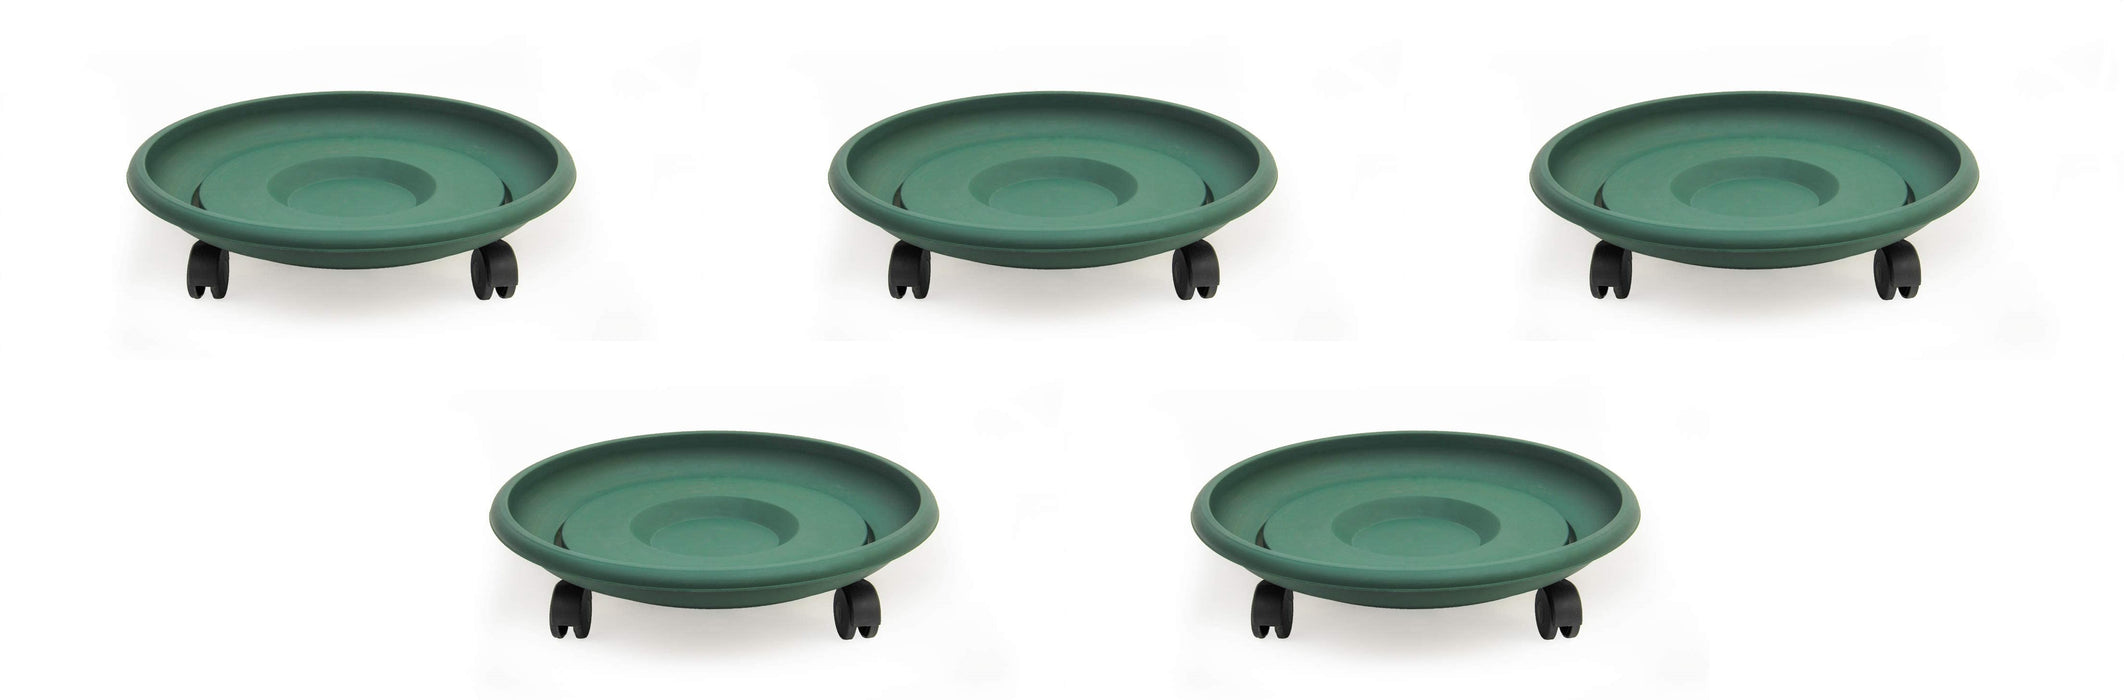 Movable Planters with Wheels. Round Caddy Plant Mover Stand Tray Saucer. (Green)